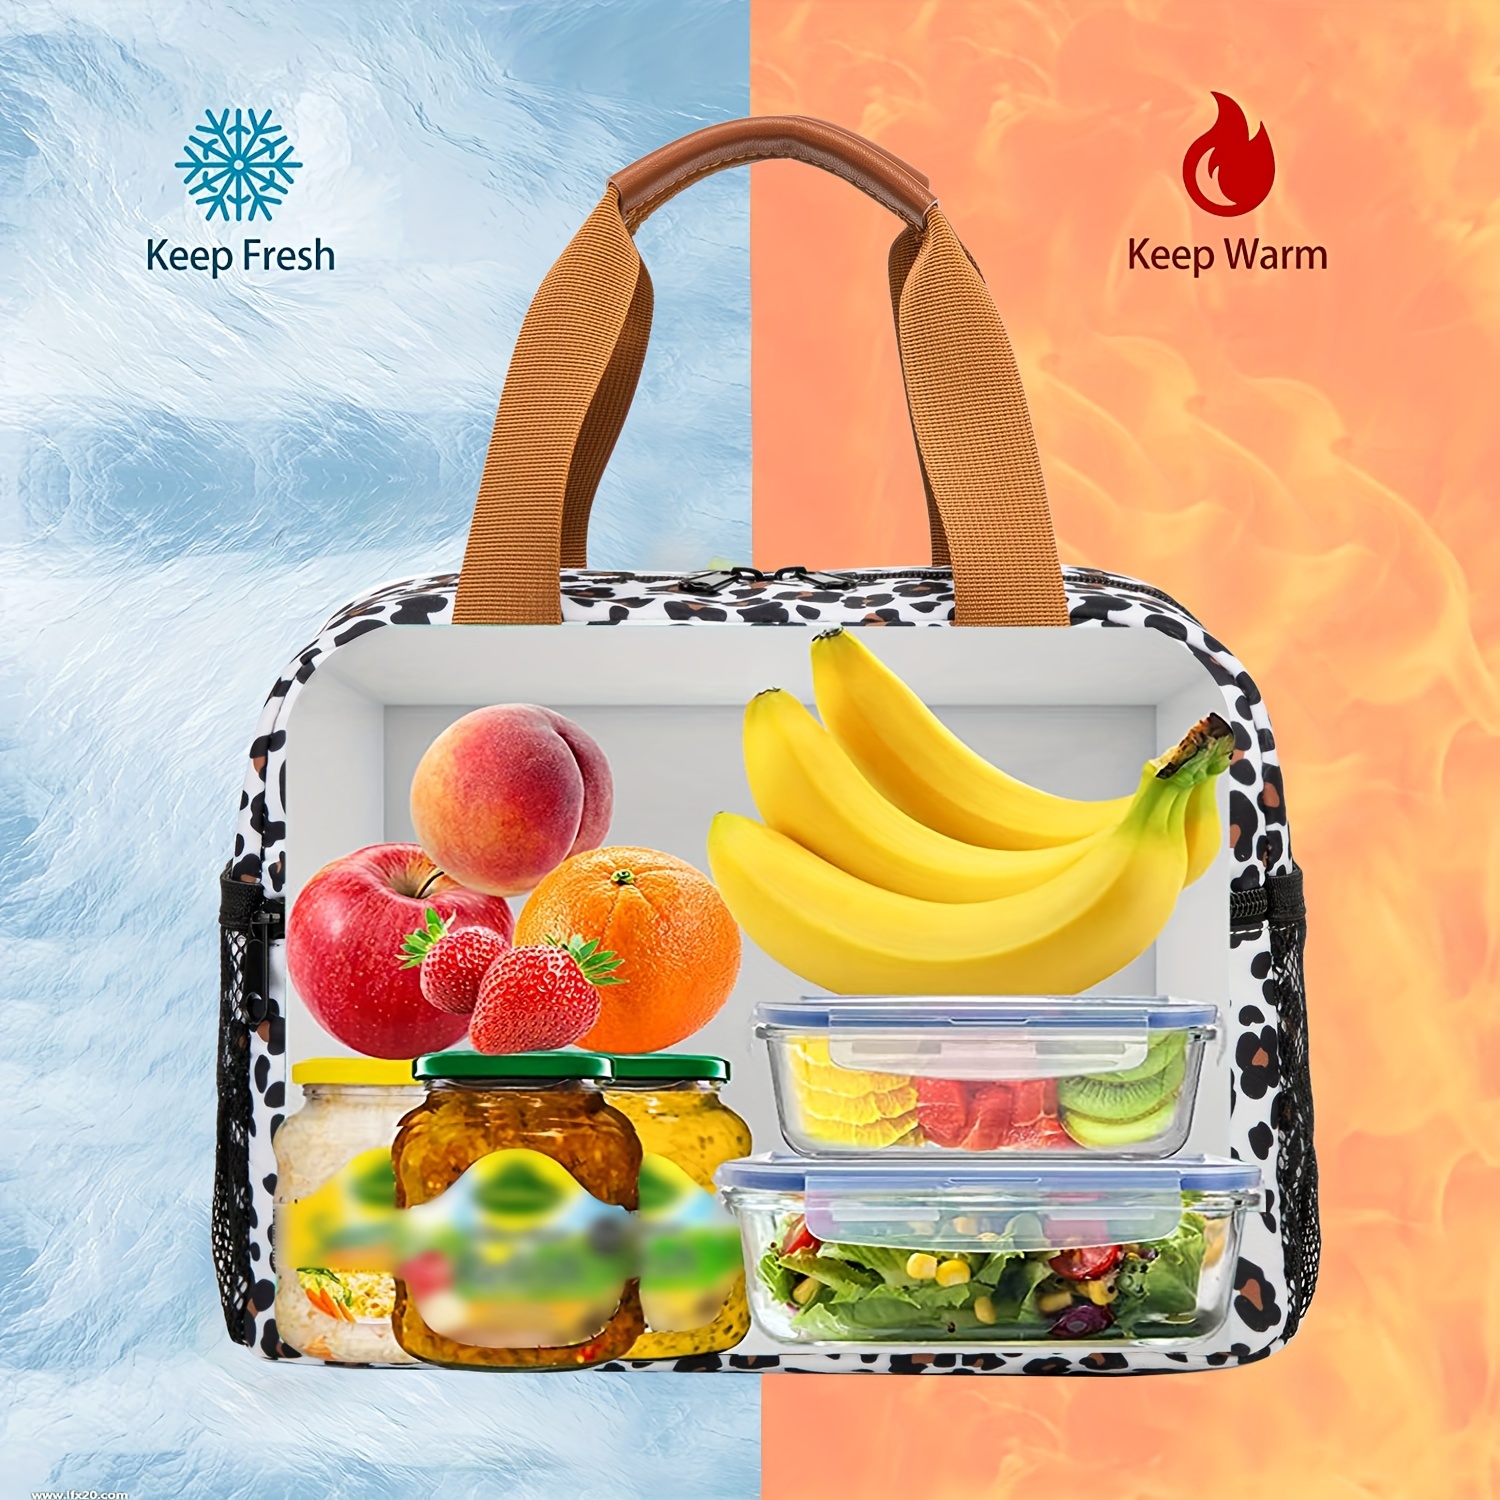 Womens Portable Thermal Plush Bento Lunch Set With Warm Rice Tote Bag  Insulated And Heat Protective For Work And Disposable Dinnerware Sets  Organization From Liyaozan66, $14.8